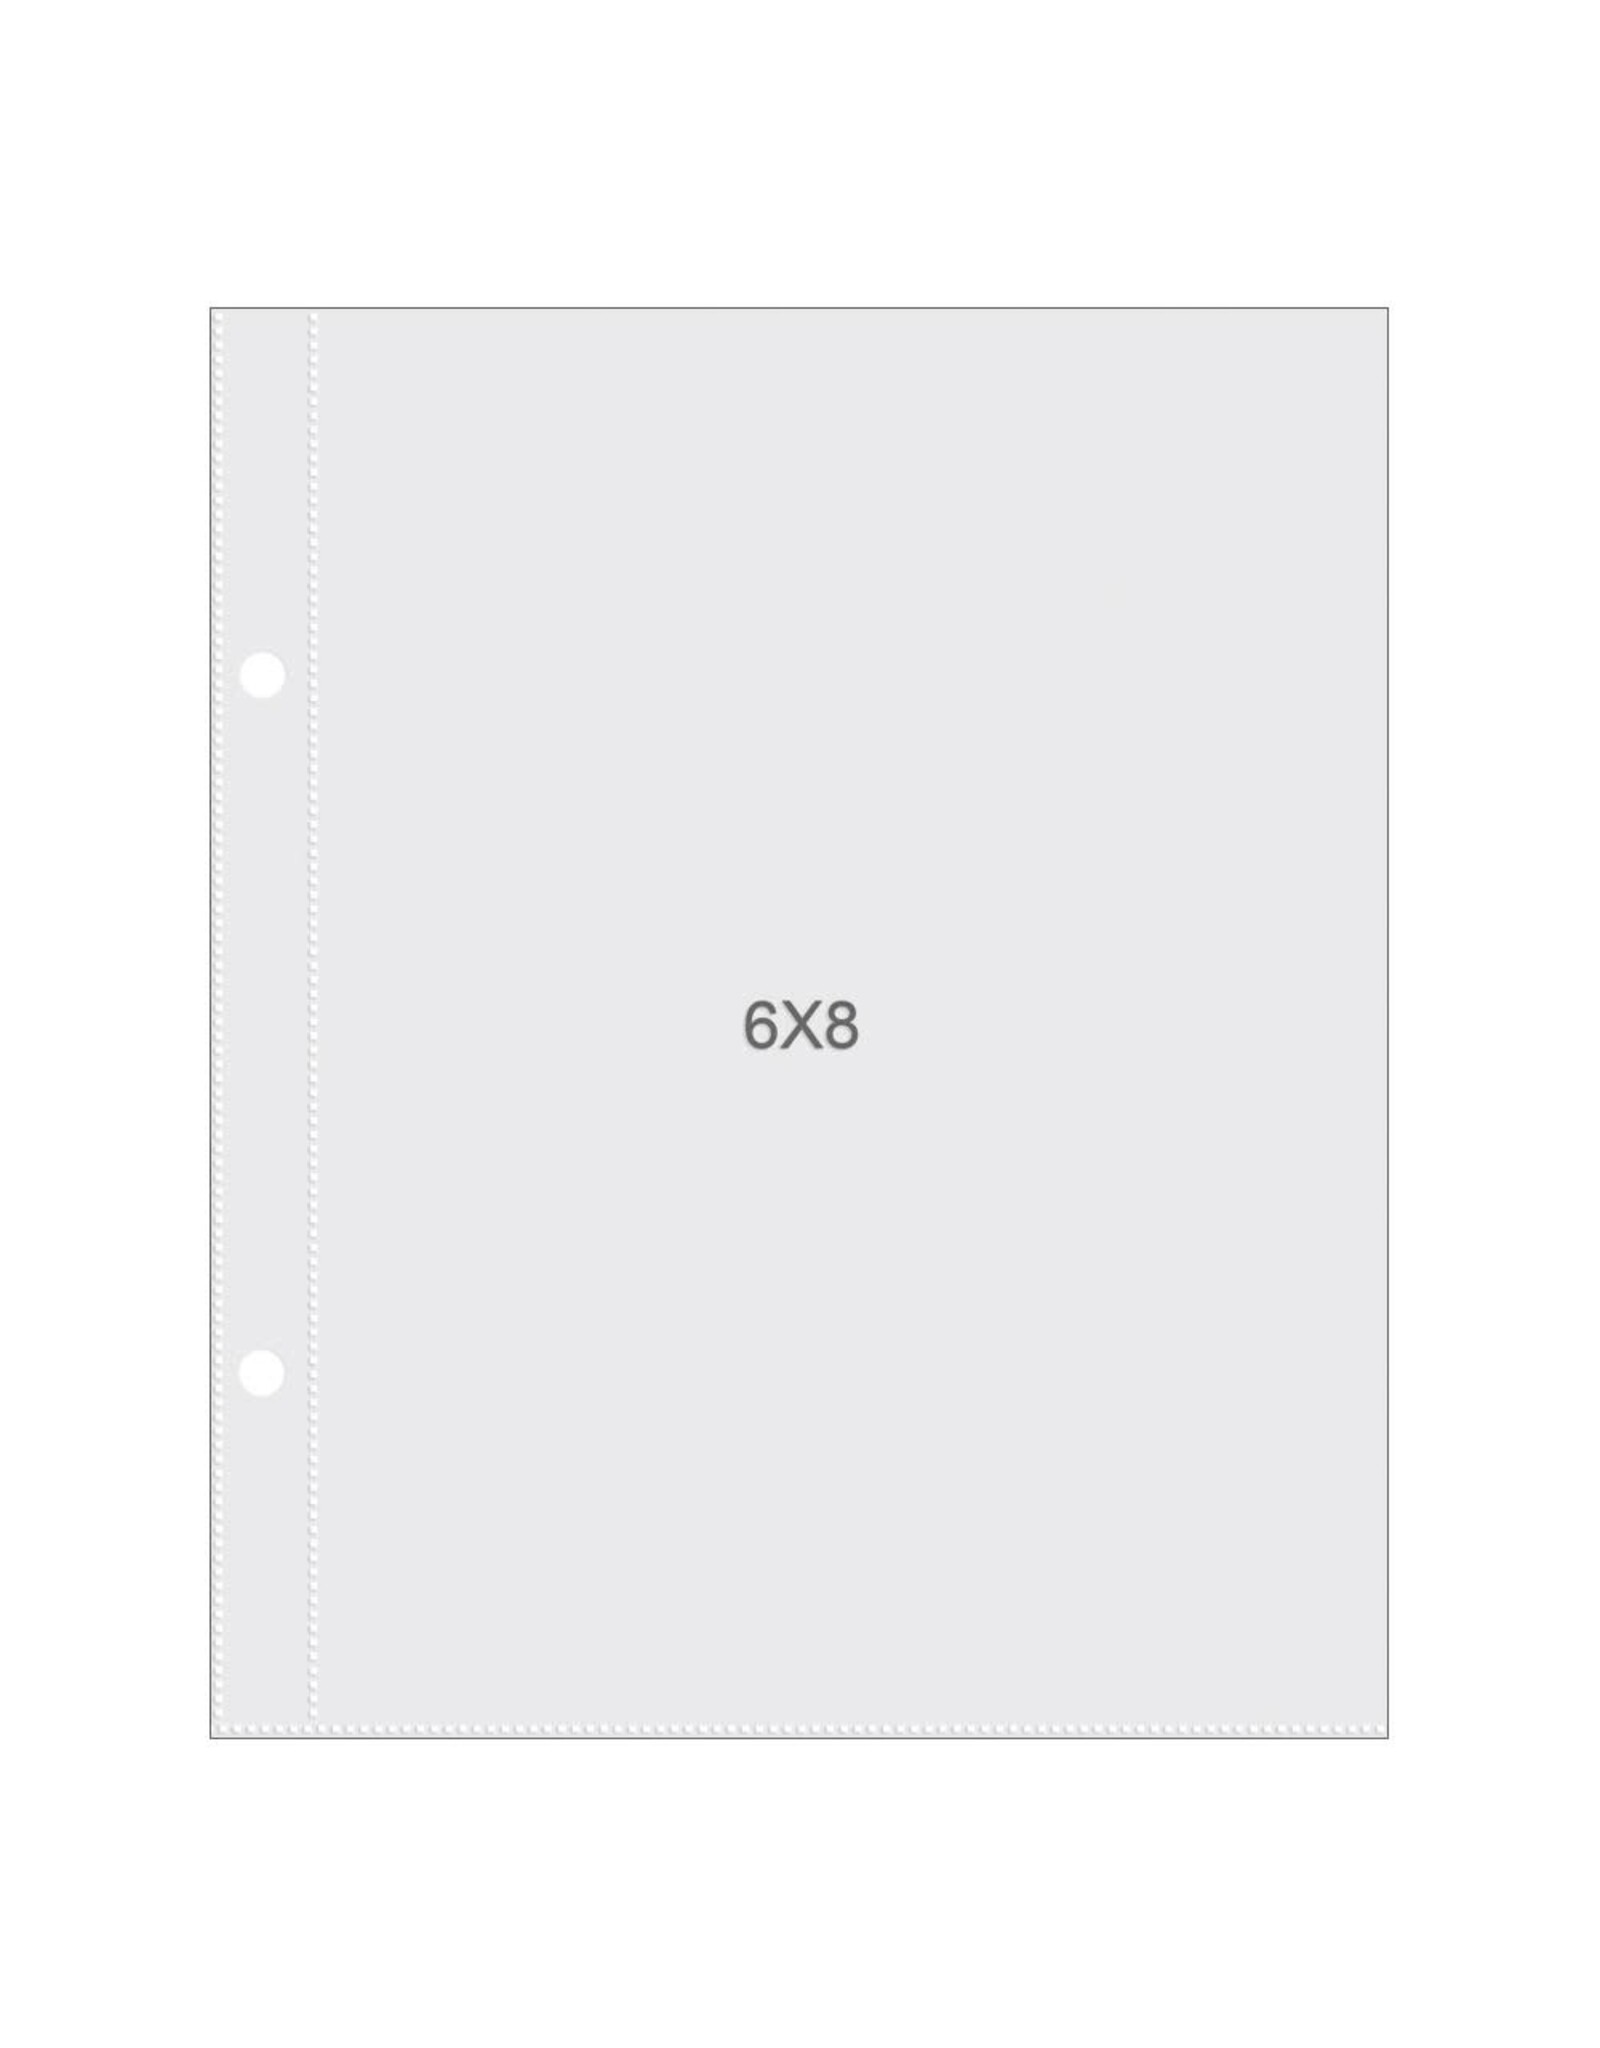 SIMPLE STORIES SIMPLE STORIES SN@P! 6X8 POCKET PAGE REFILLS 10PK